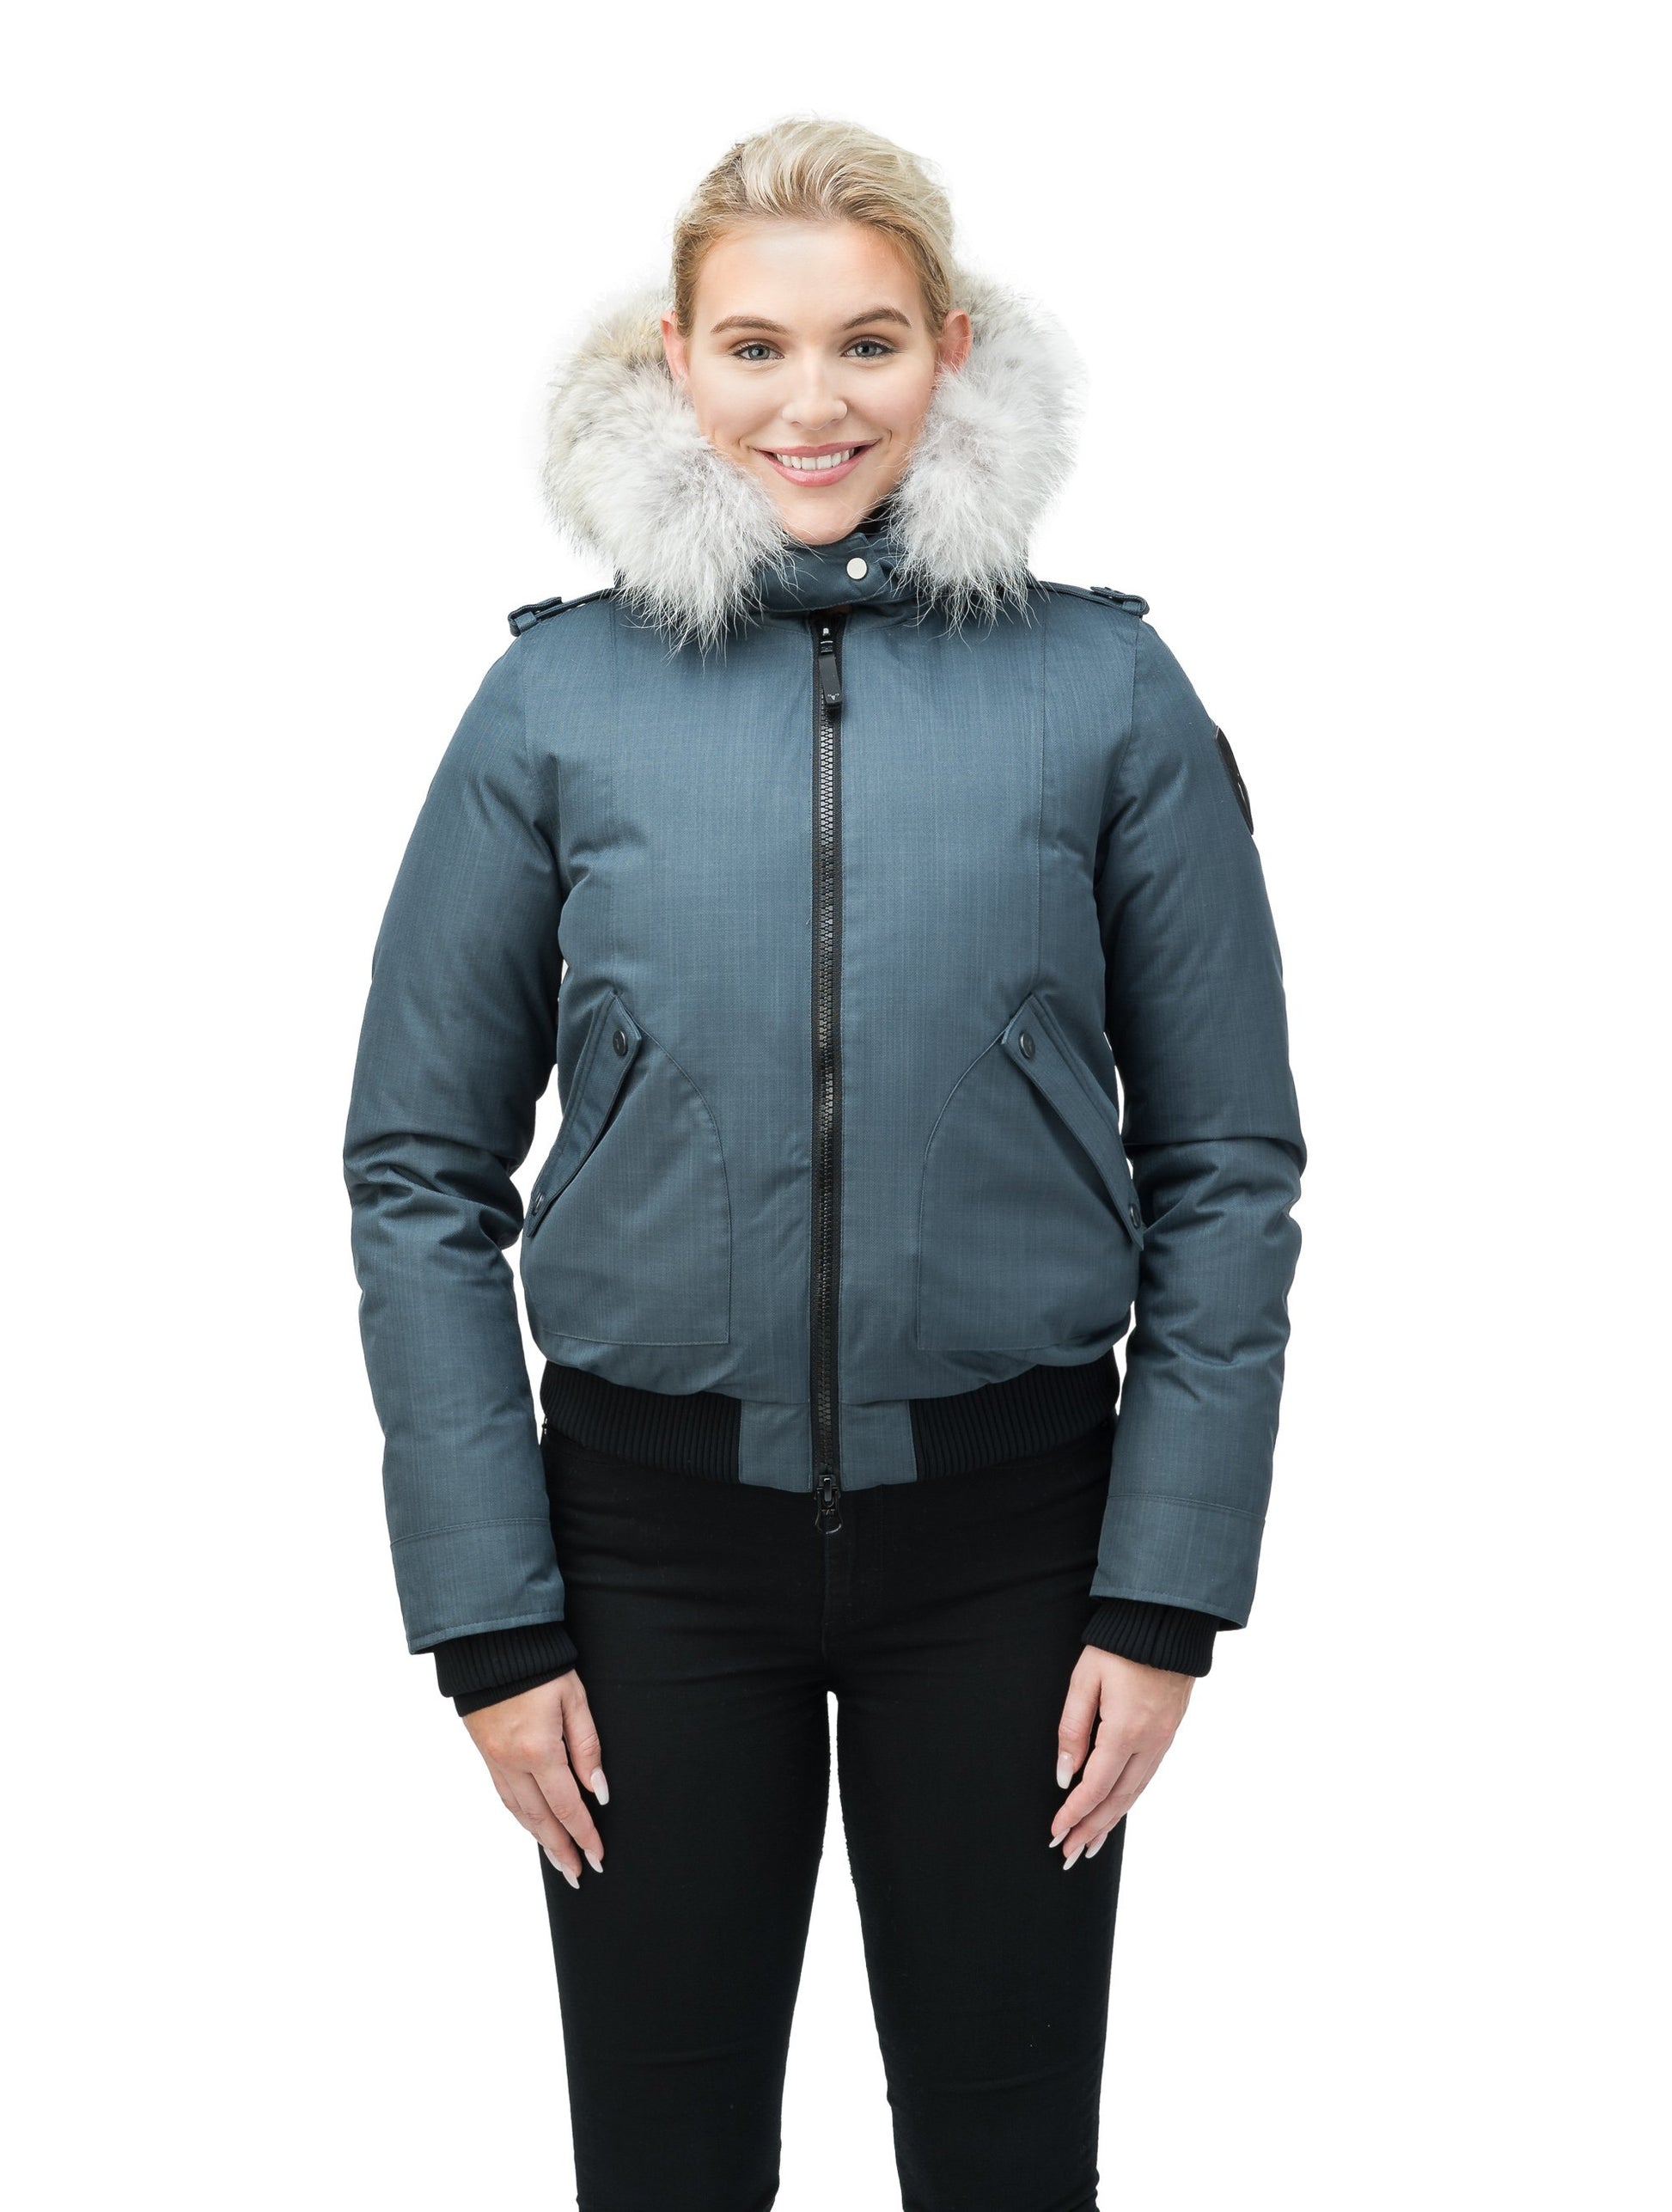 Women's bomber style down filled jacket with a removable hood and fur trim in CH Balsam